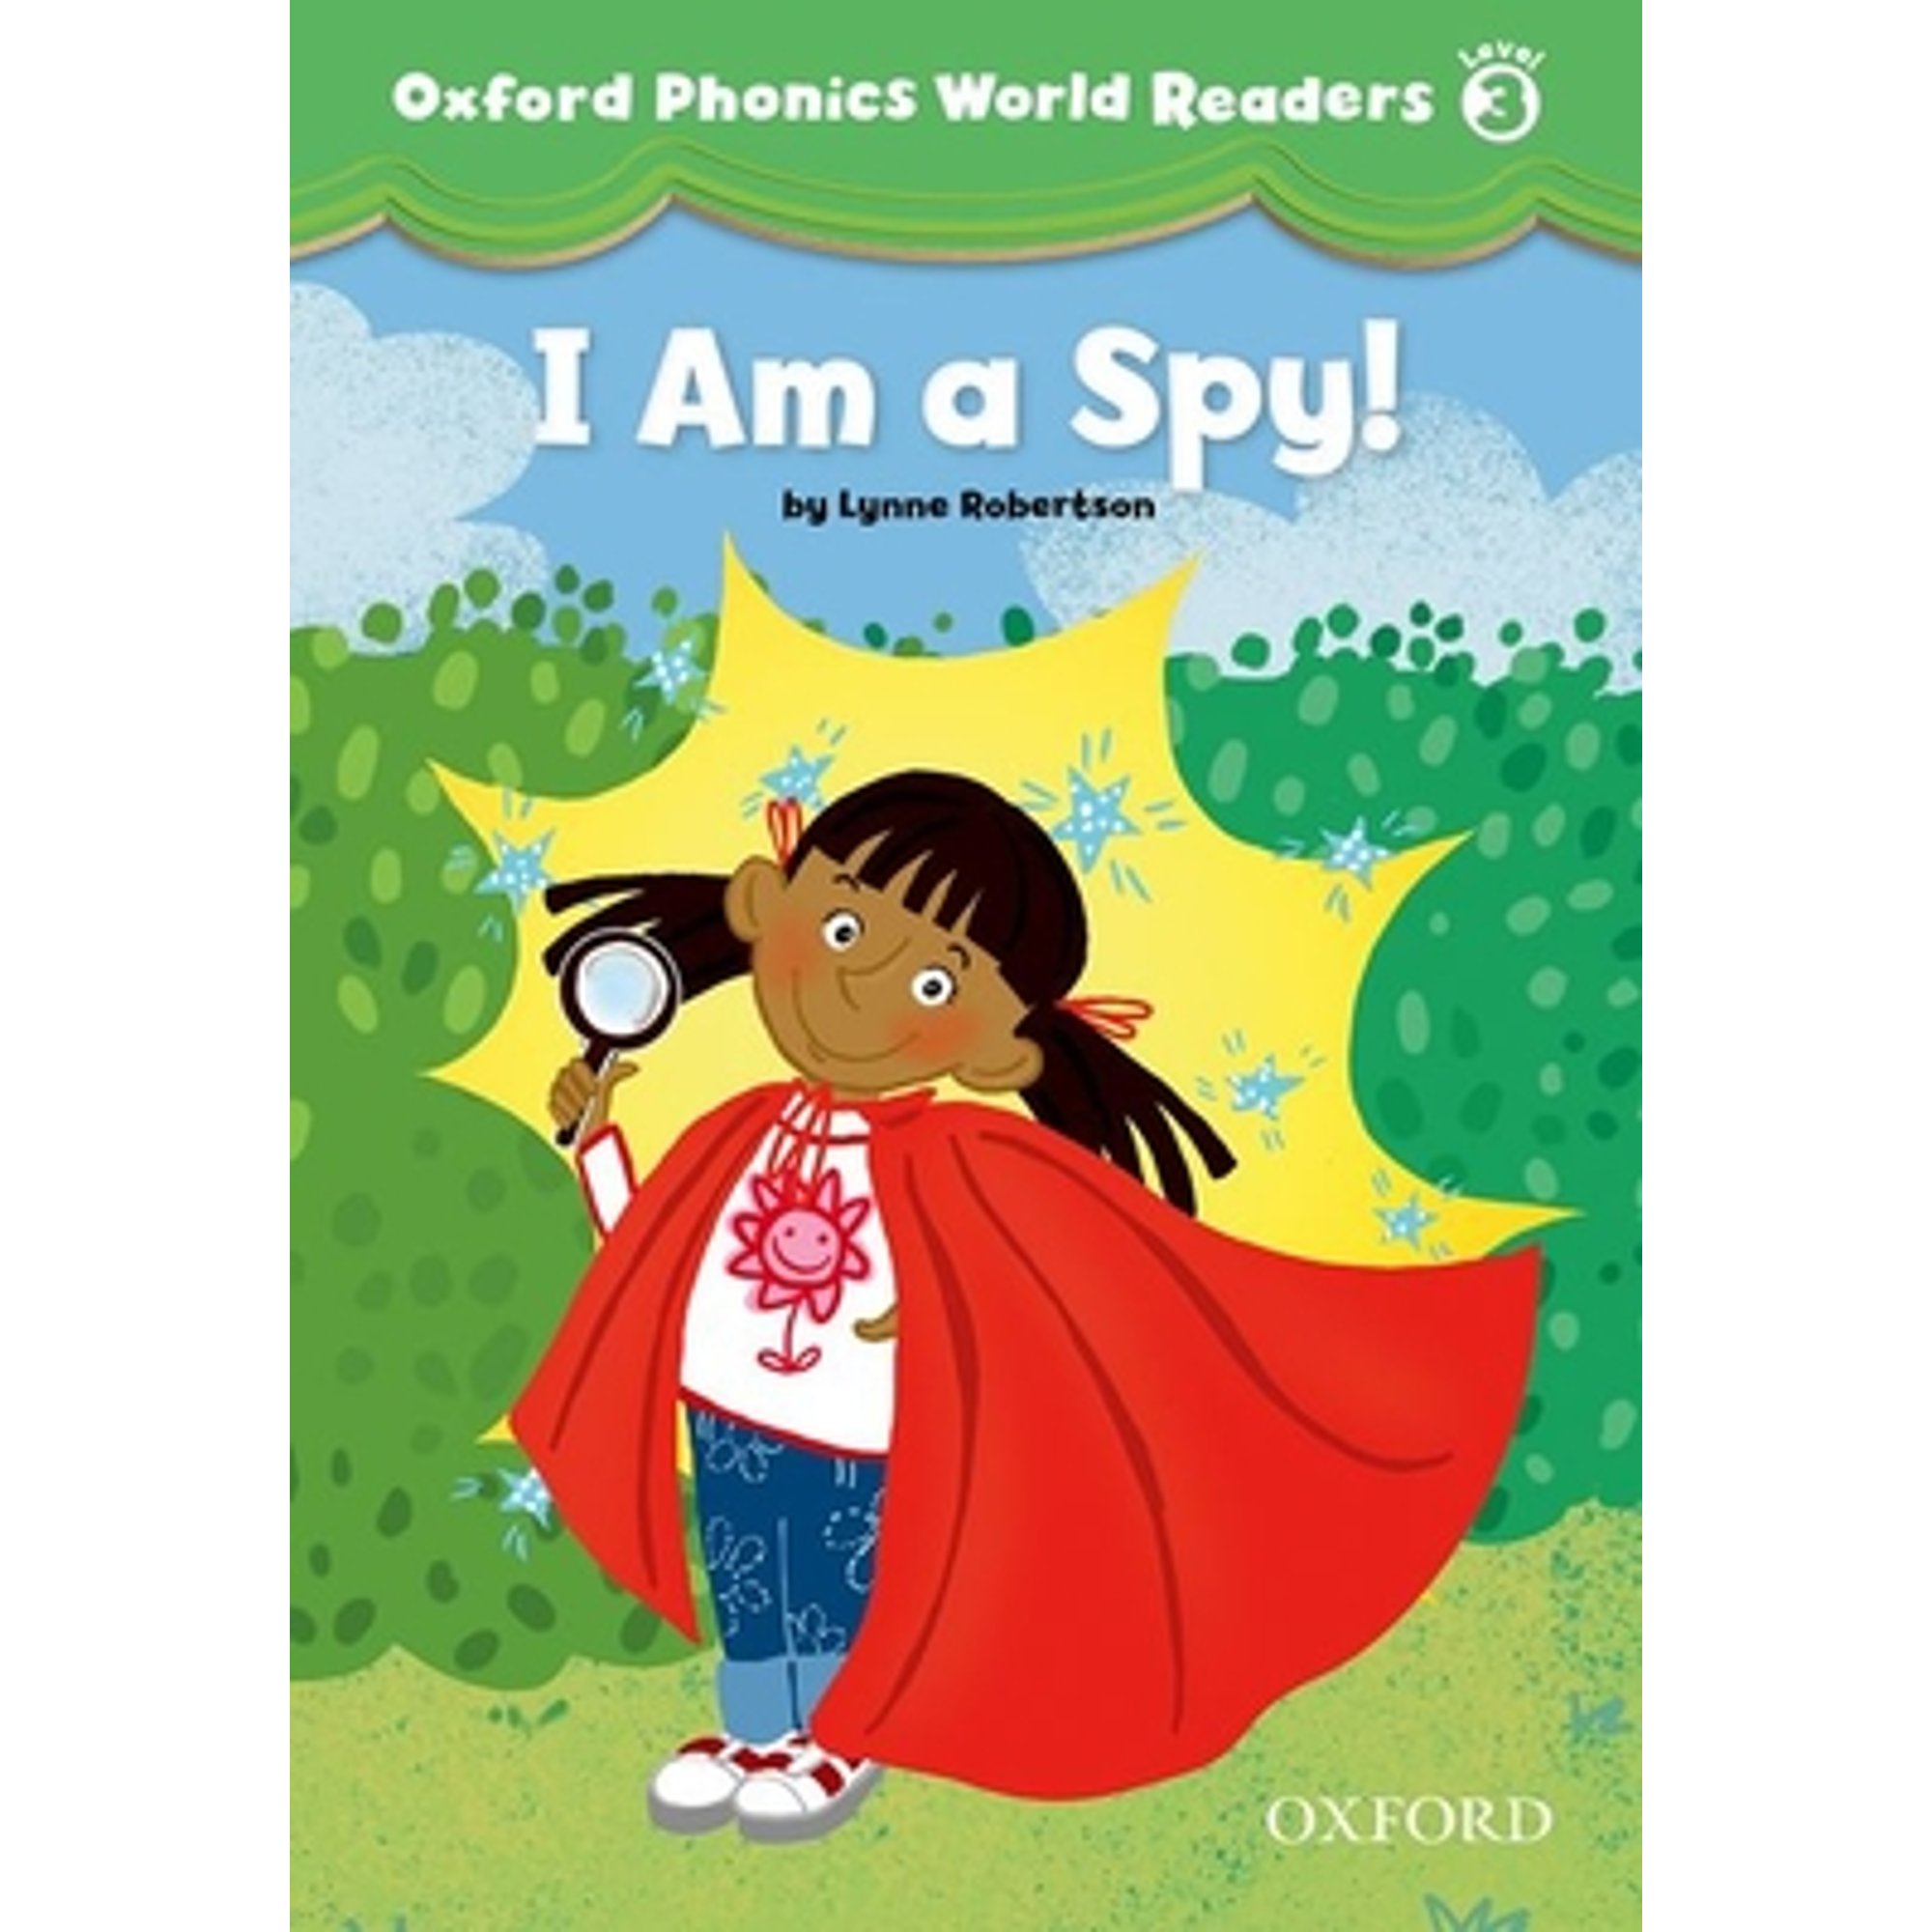 am　Pre-Owned　a　Oxford　Level　Phonics　Spy!　World　Readers:　3:　I　(Paperback　9780194589123)